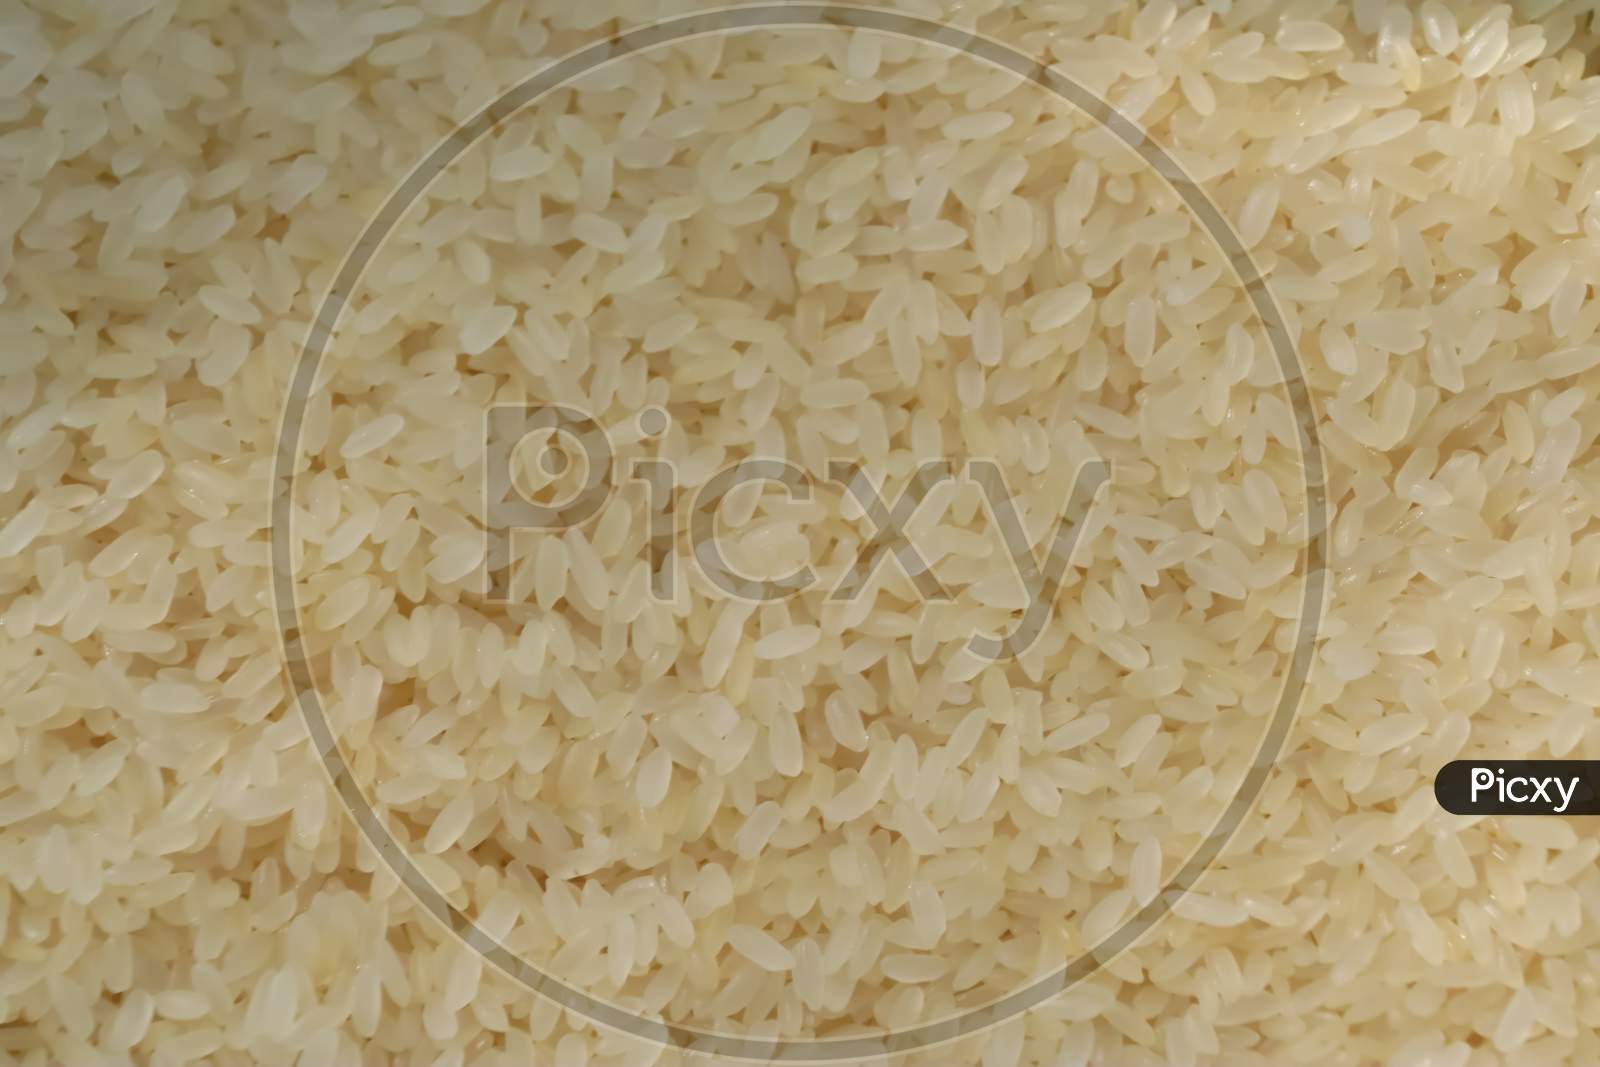 These are the rice